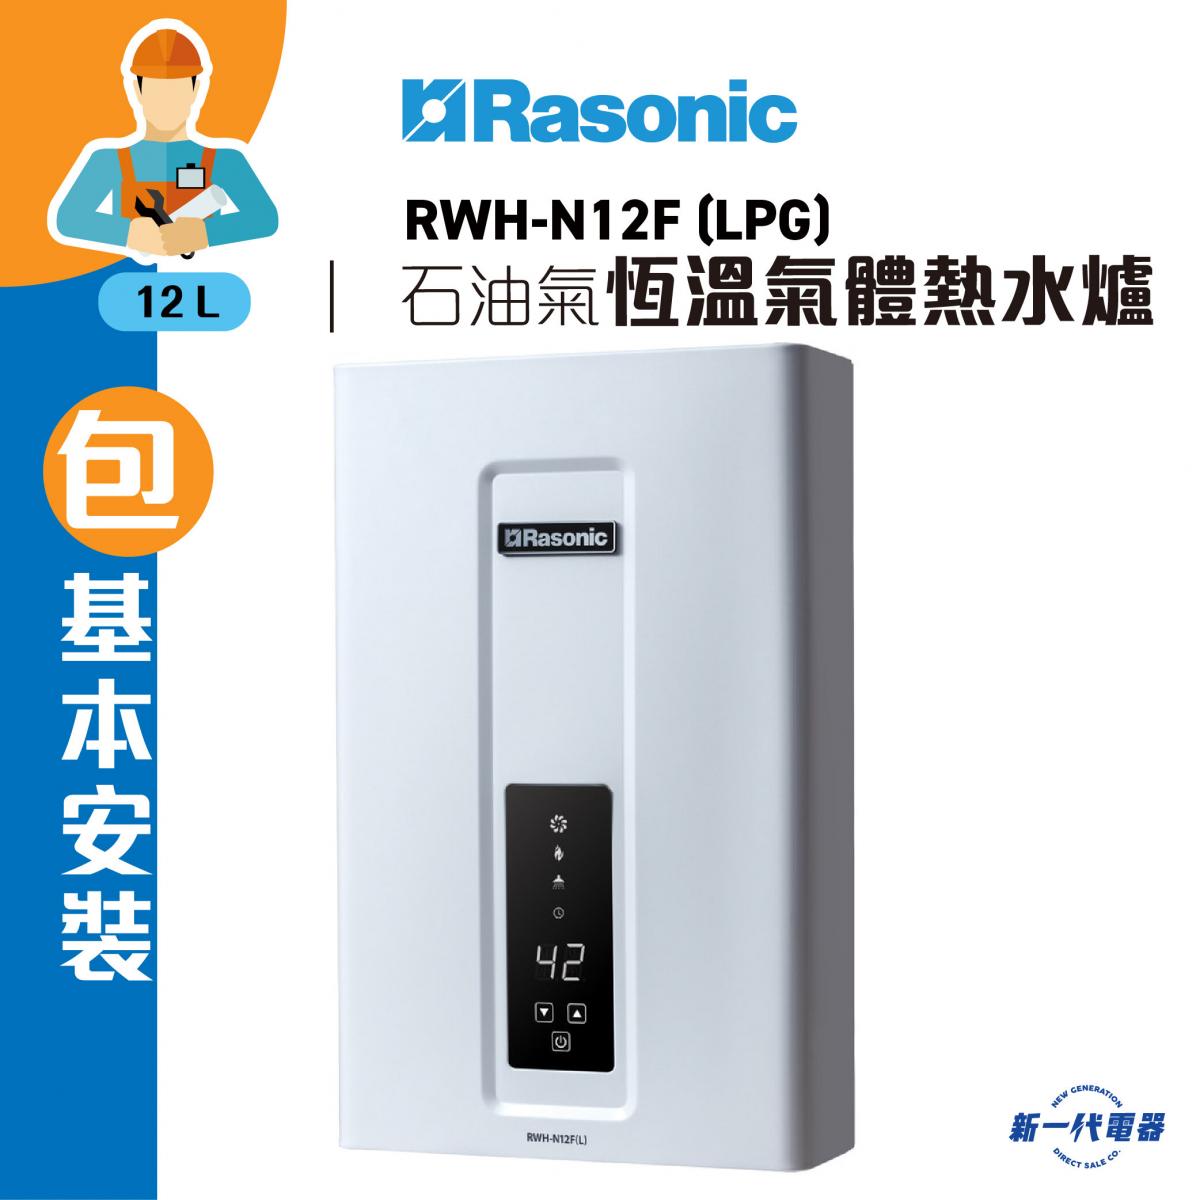 RWHN12F (basic installation)(LPG)(WHITE)  Instantaneous Gas Water Heater (RWH-N12F)